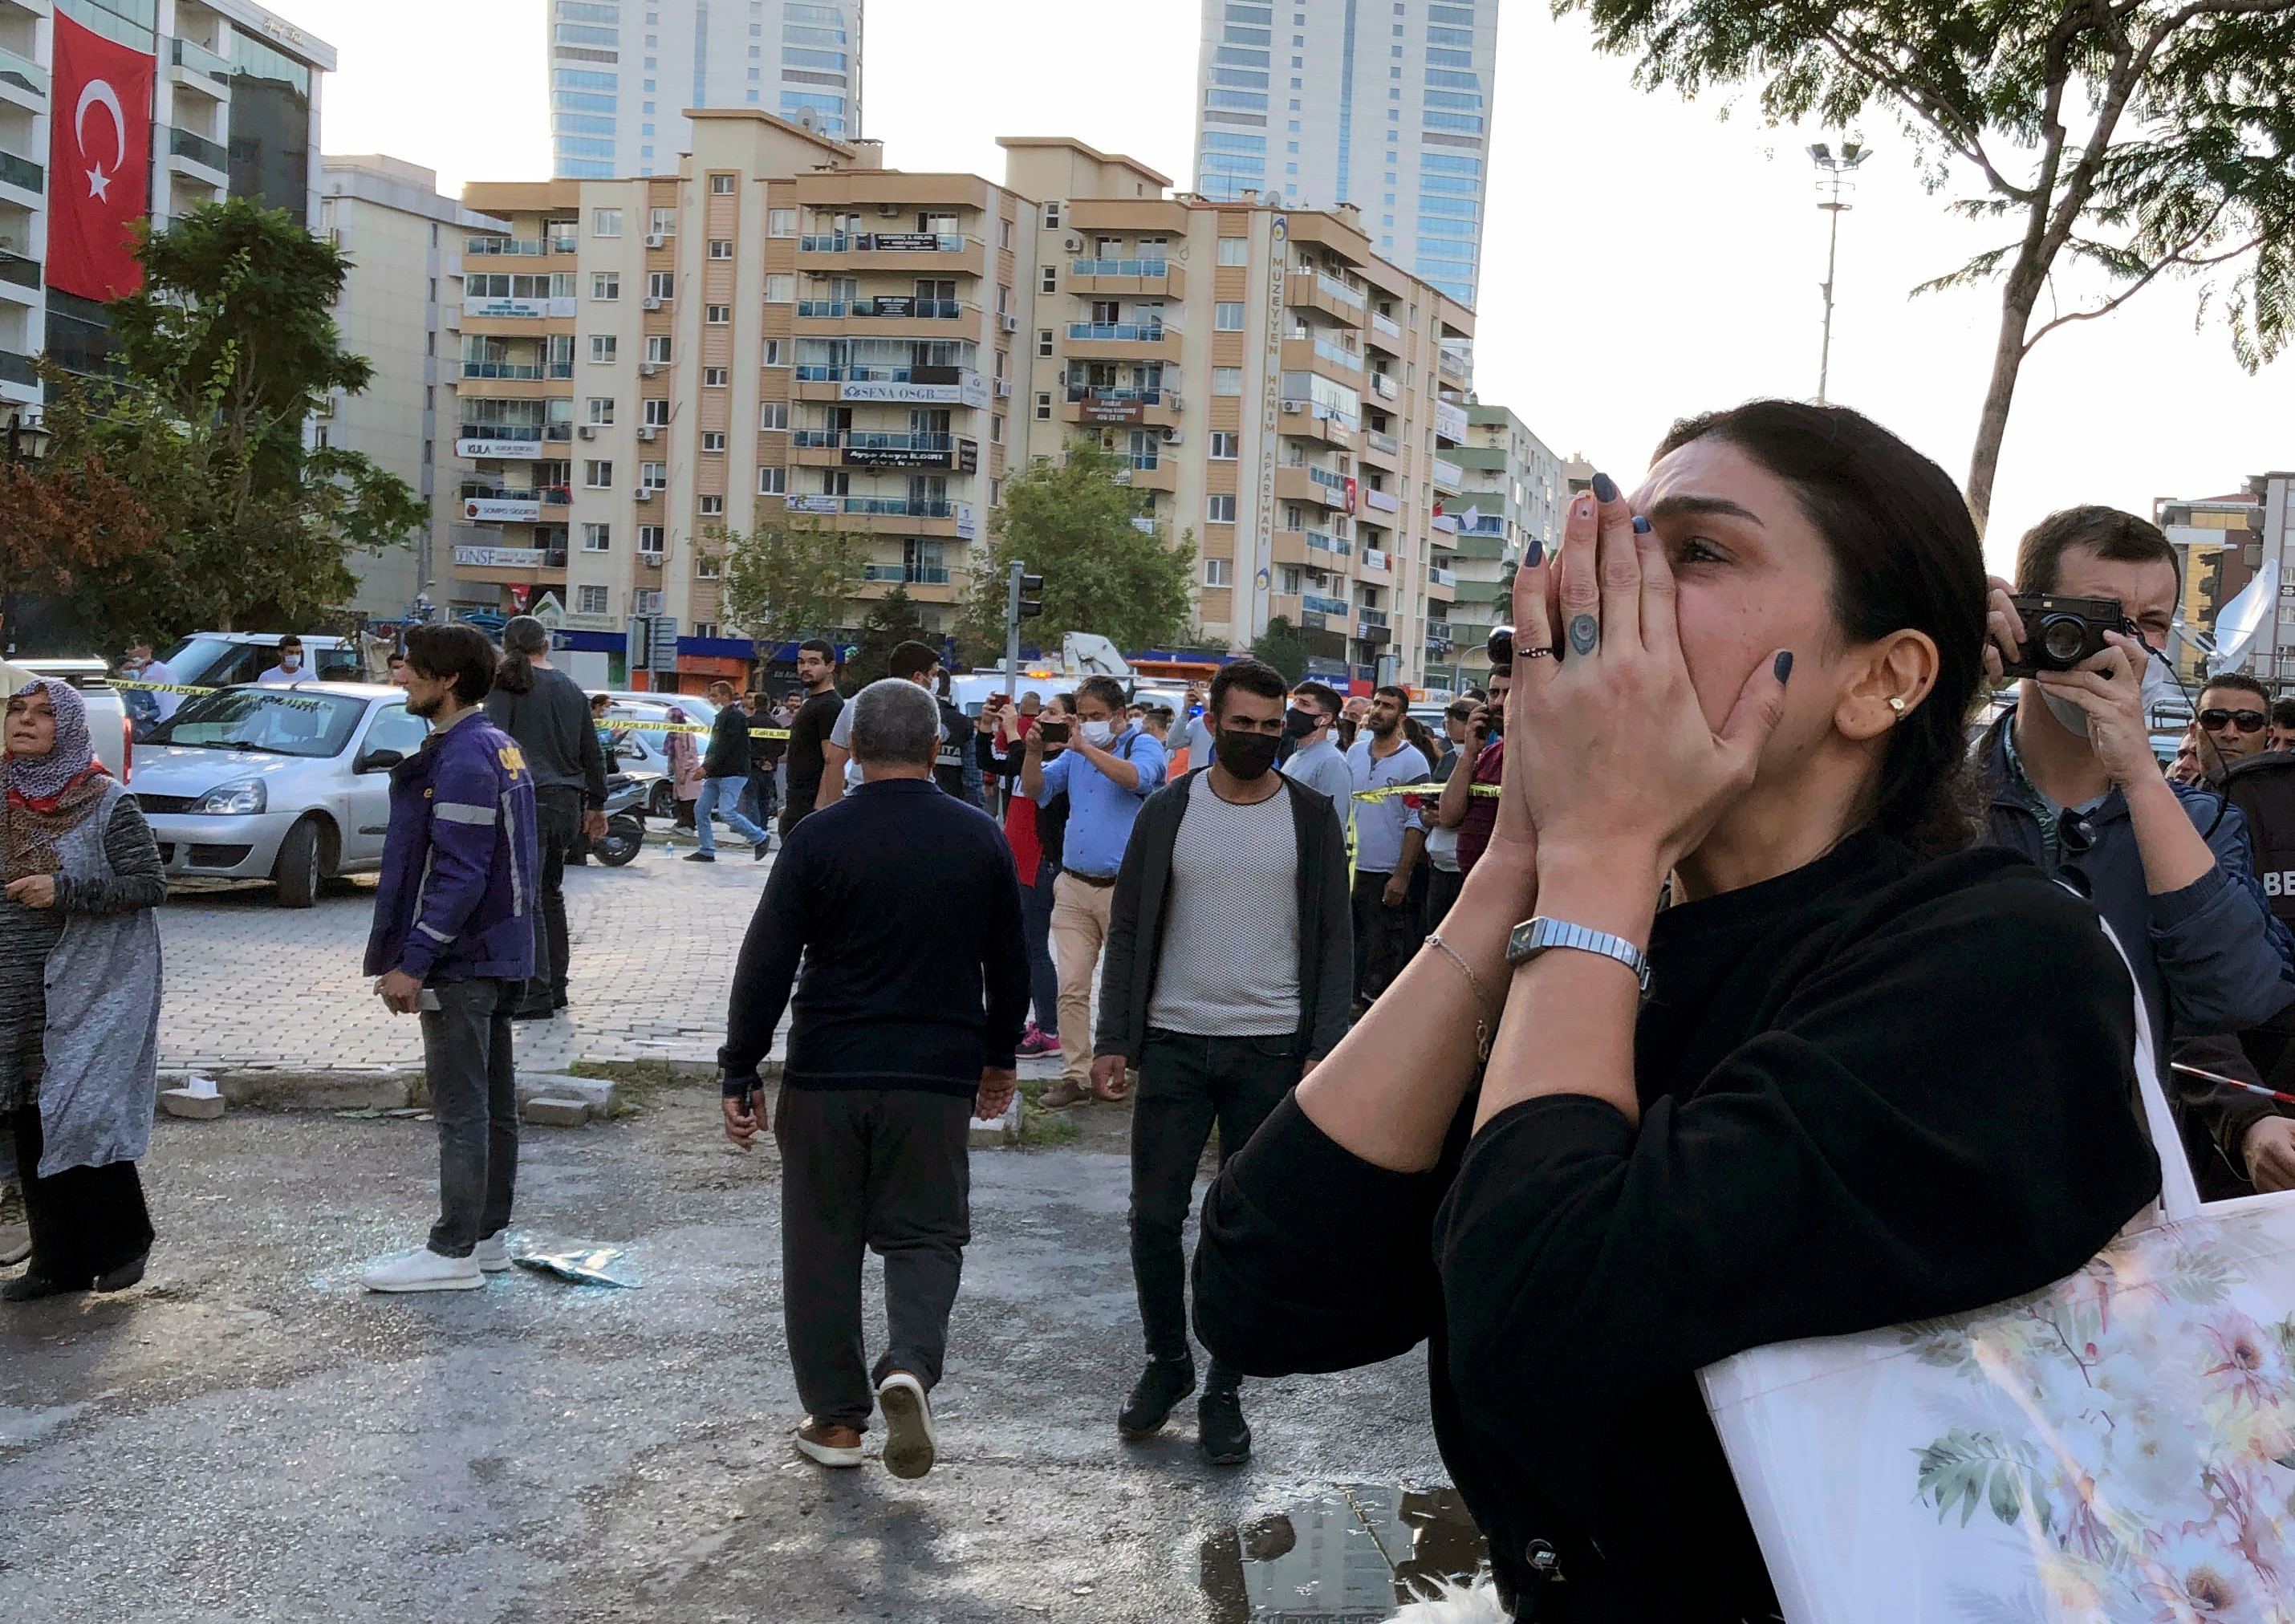 A woman watches as rescue workers try to save people trapped in the debris of a collapsed building, in Izmir, Turkey, Friday, Oct. 30, 2020